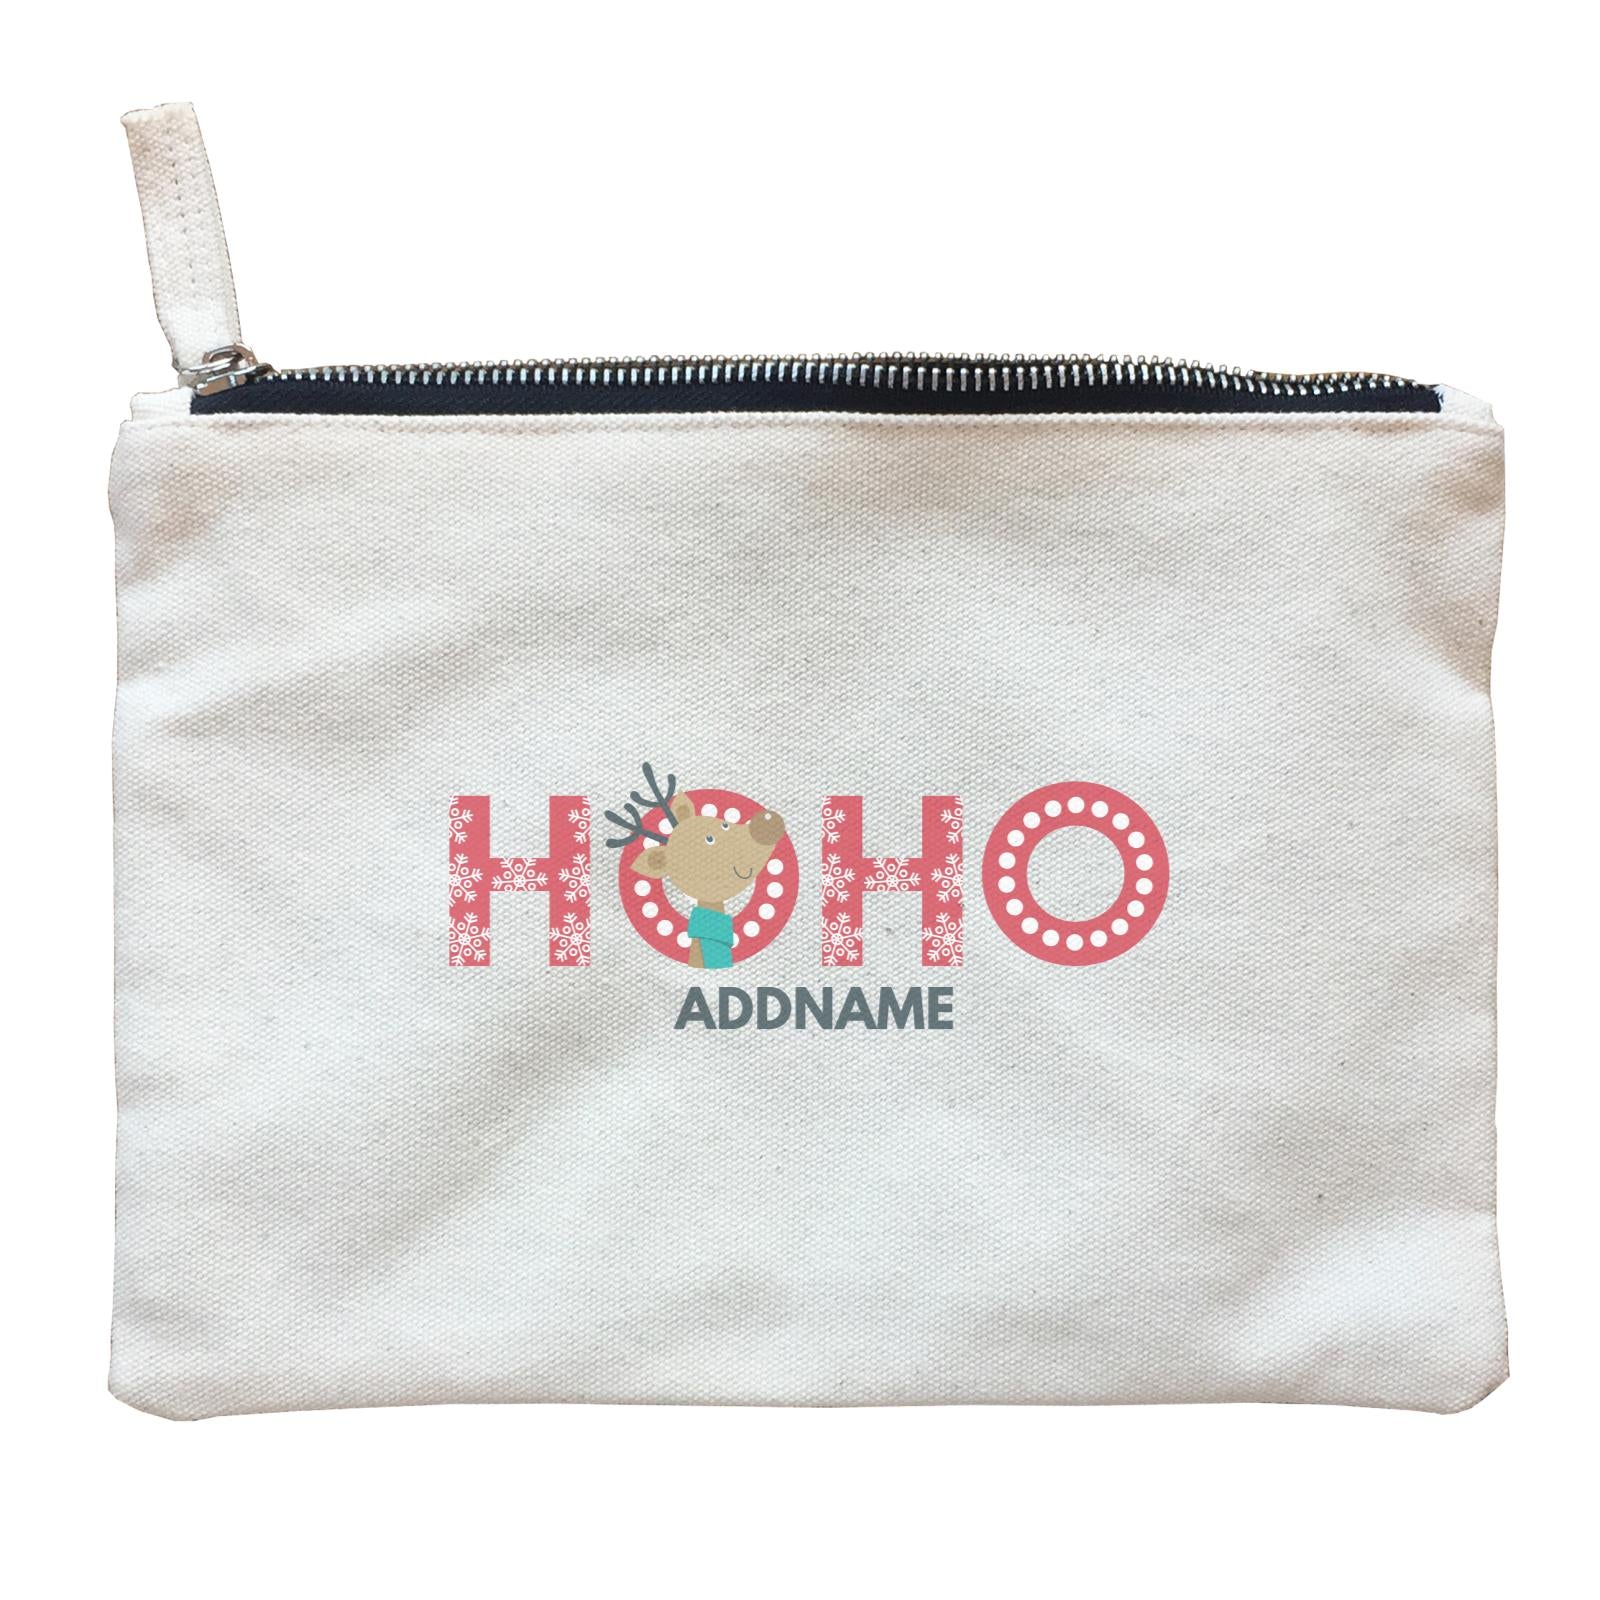 Christmas HOHO With Reindeer Addname Accessories Zipper Pouch